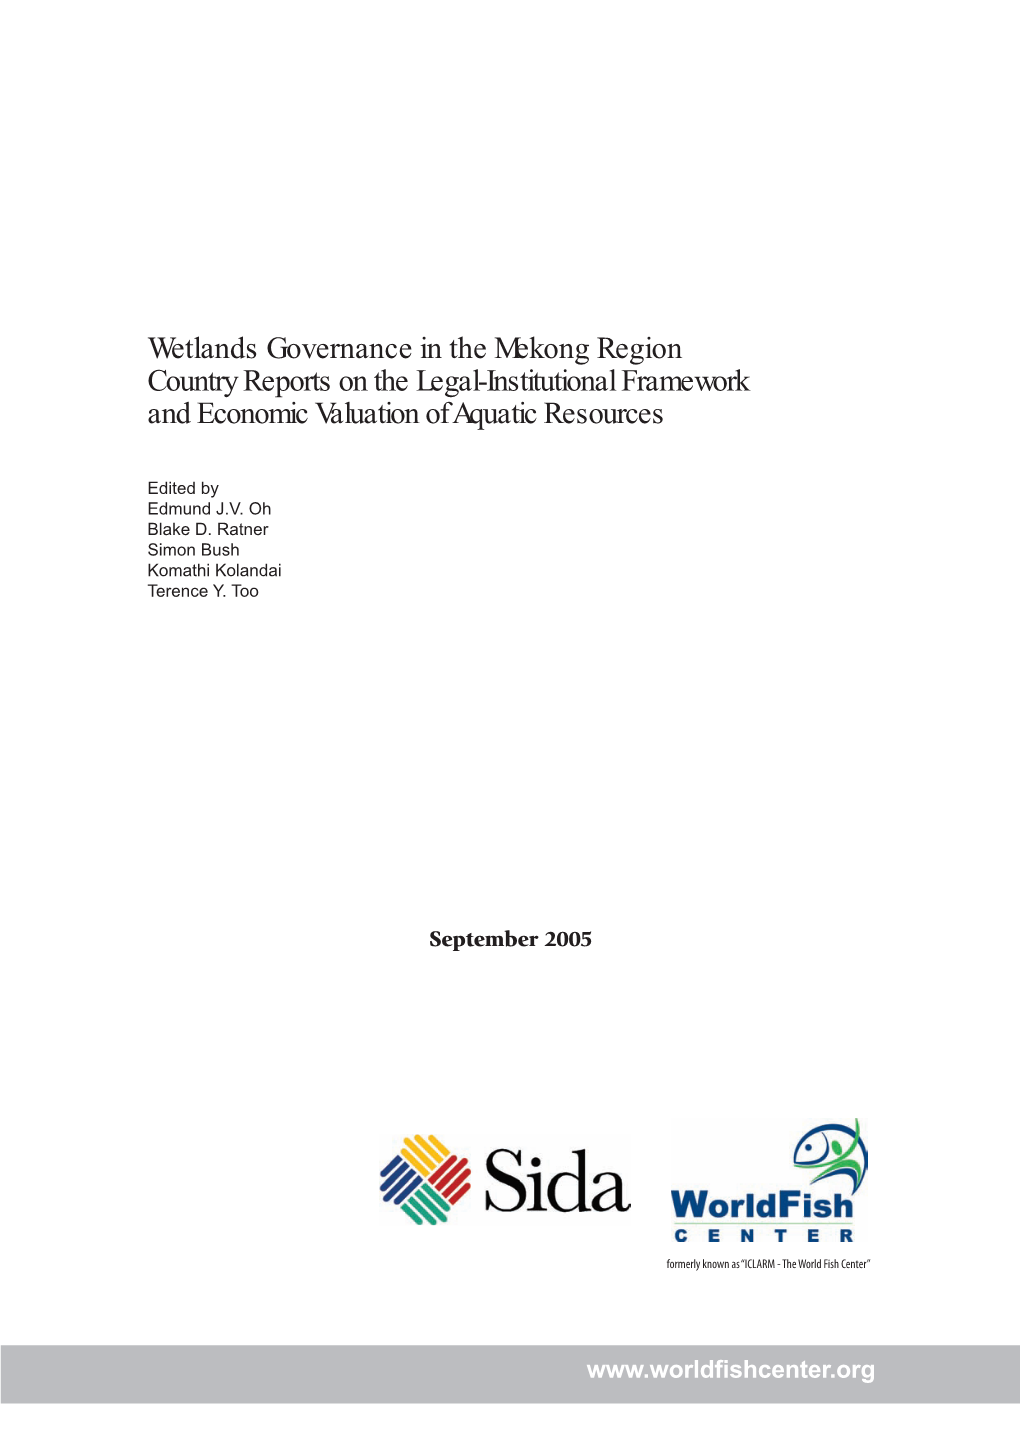 Wetlands Governance in the Mekong Region Country Reports on the Legal-Institutional Framework and Economic Valuation of Aquatic Resources